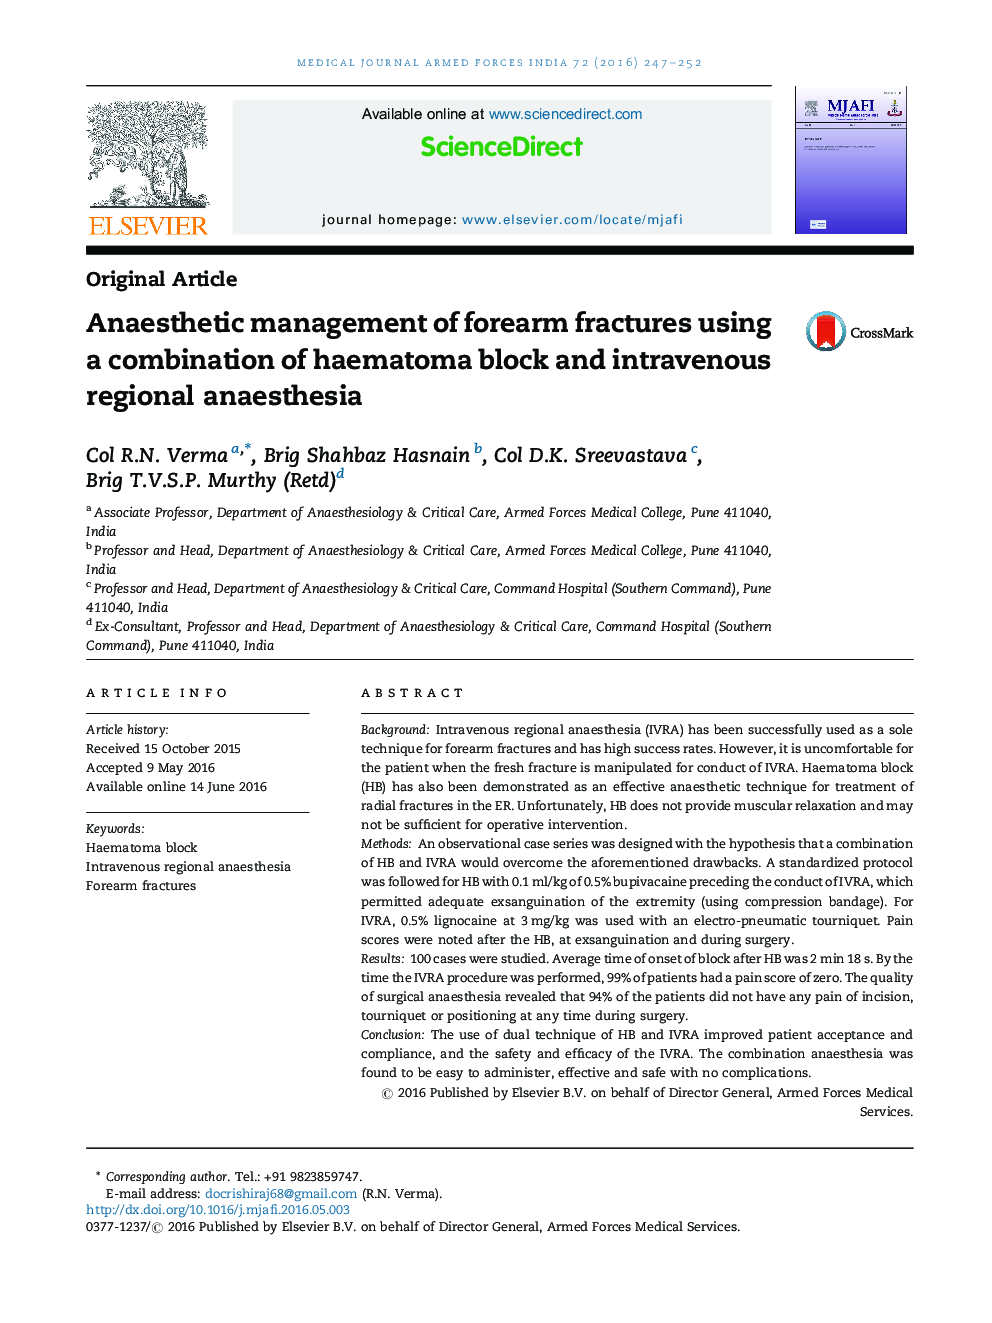 Anaesthetic management of forearm fractures using a combination of haematoma block and intravenous regional anaesthesia